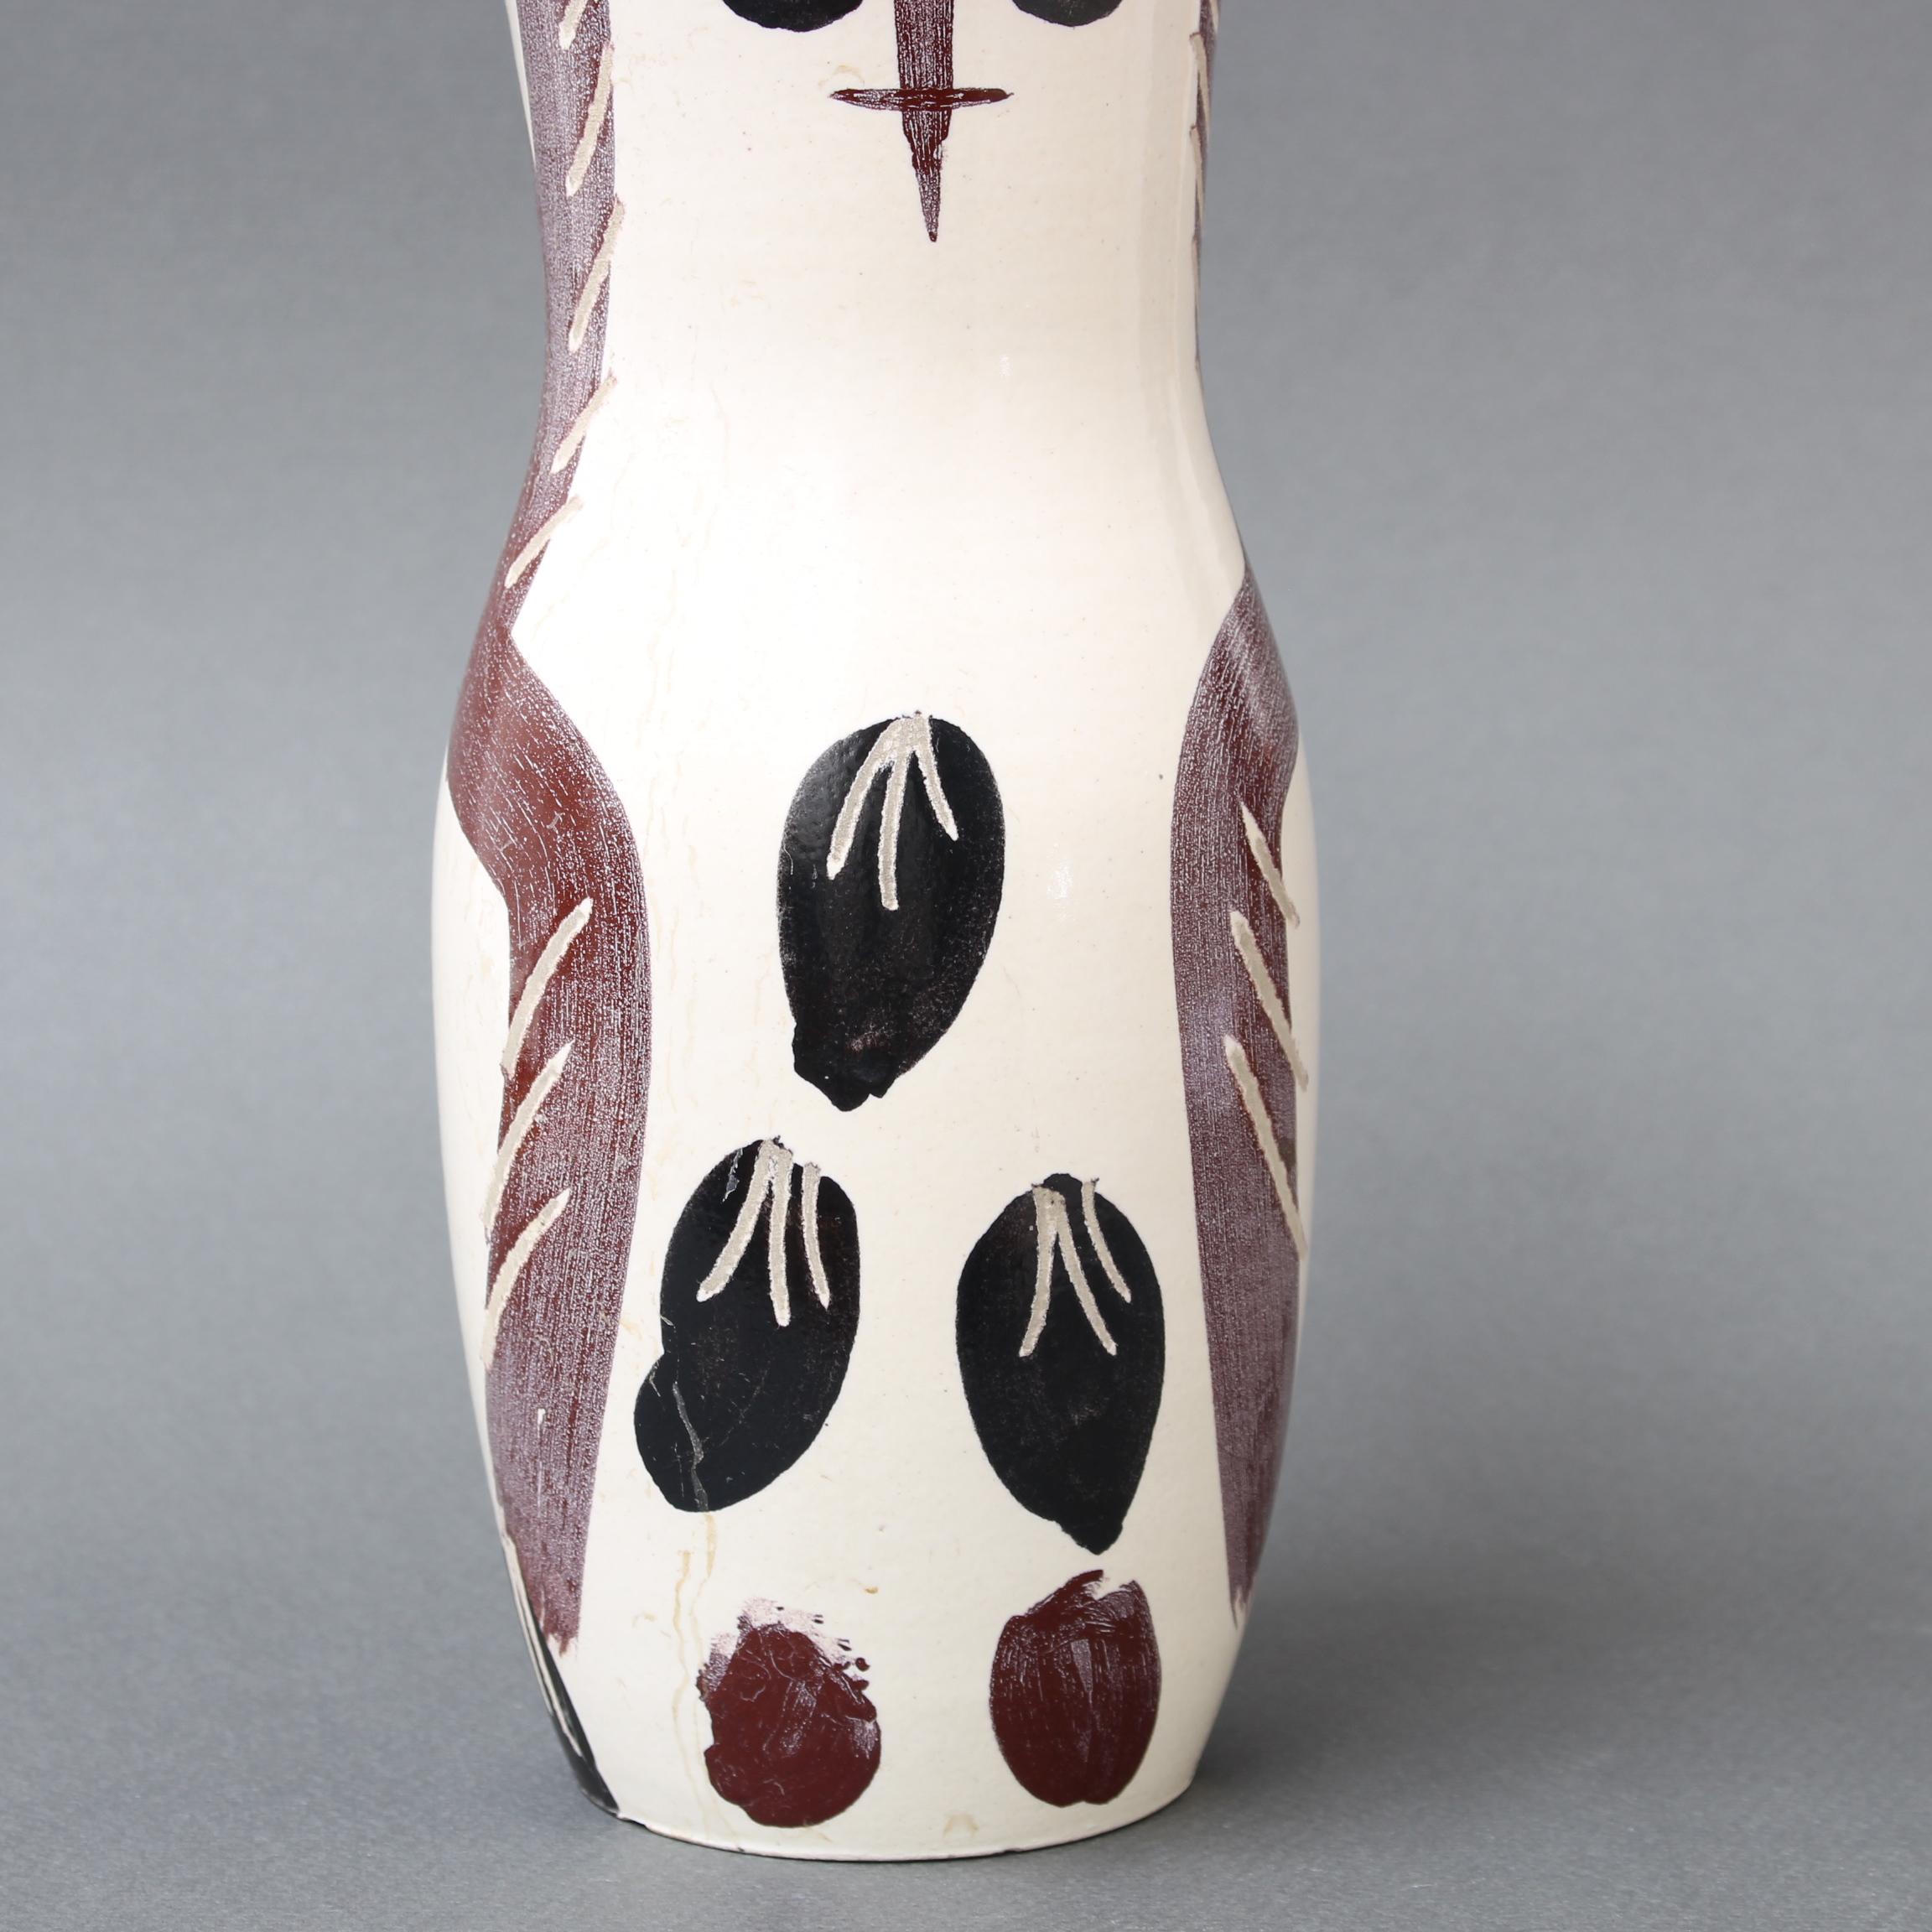 Ceramic Owl Vase (A.R. 135) from the Madoura Pottery by Pablo Picasso For Sale 6